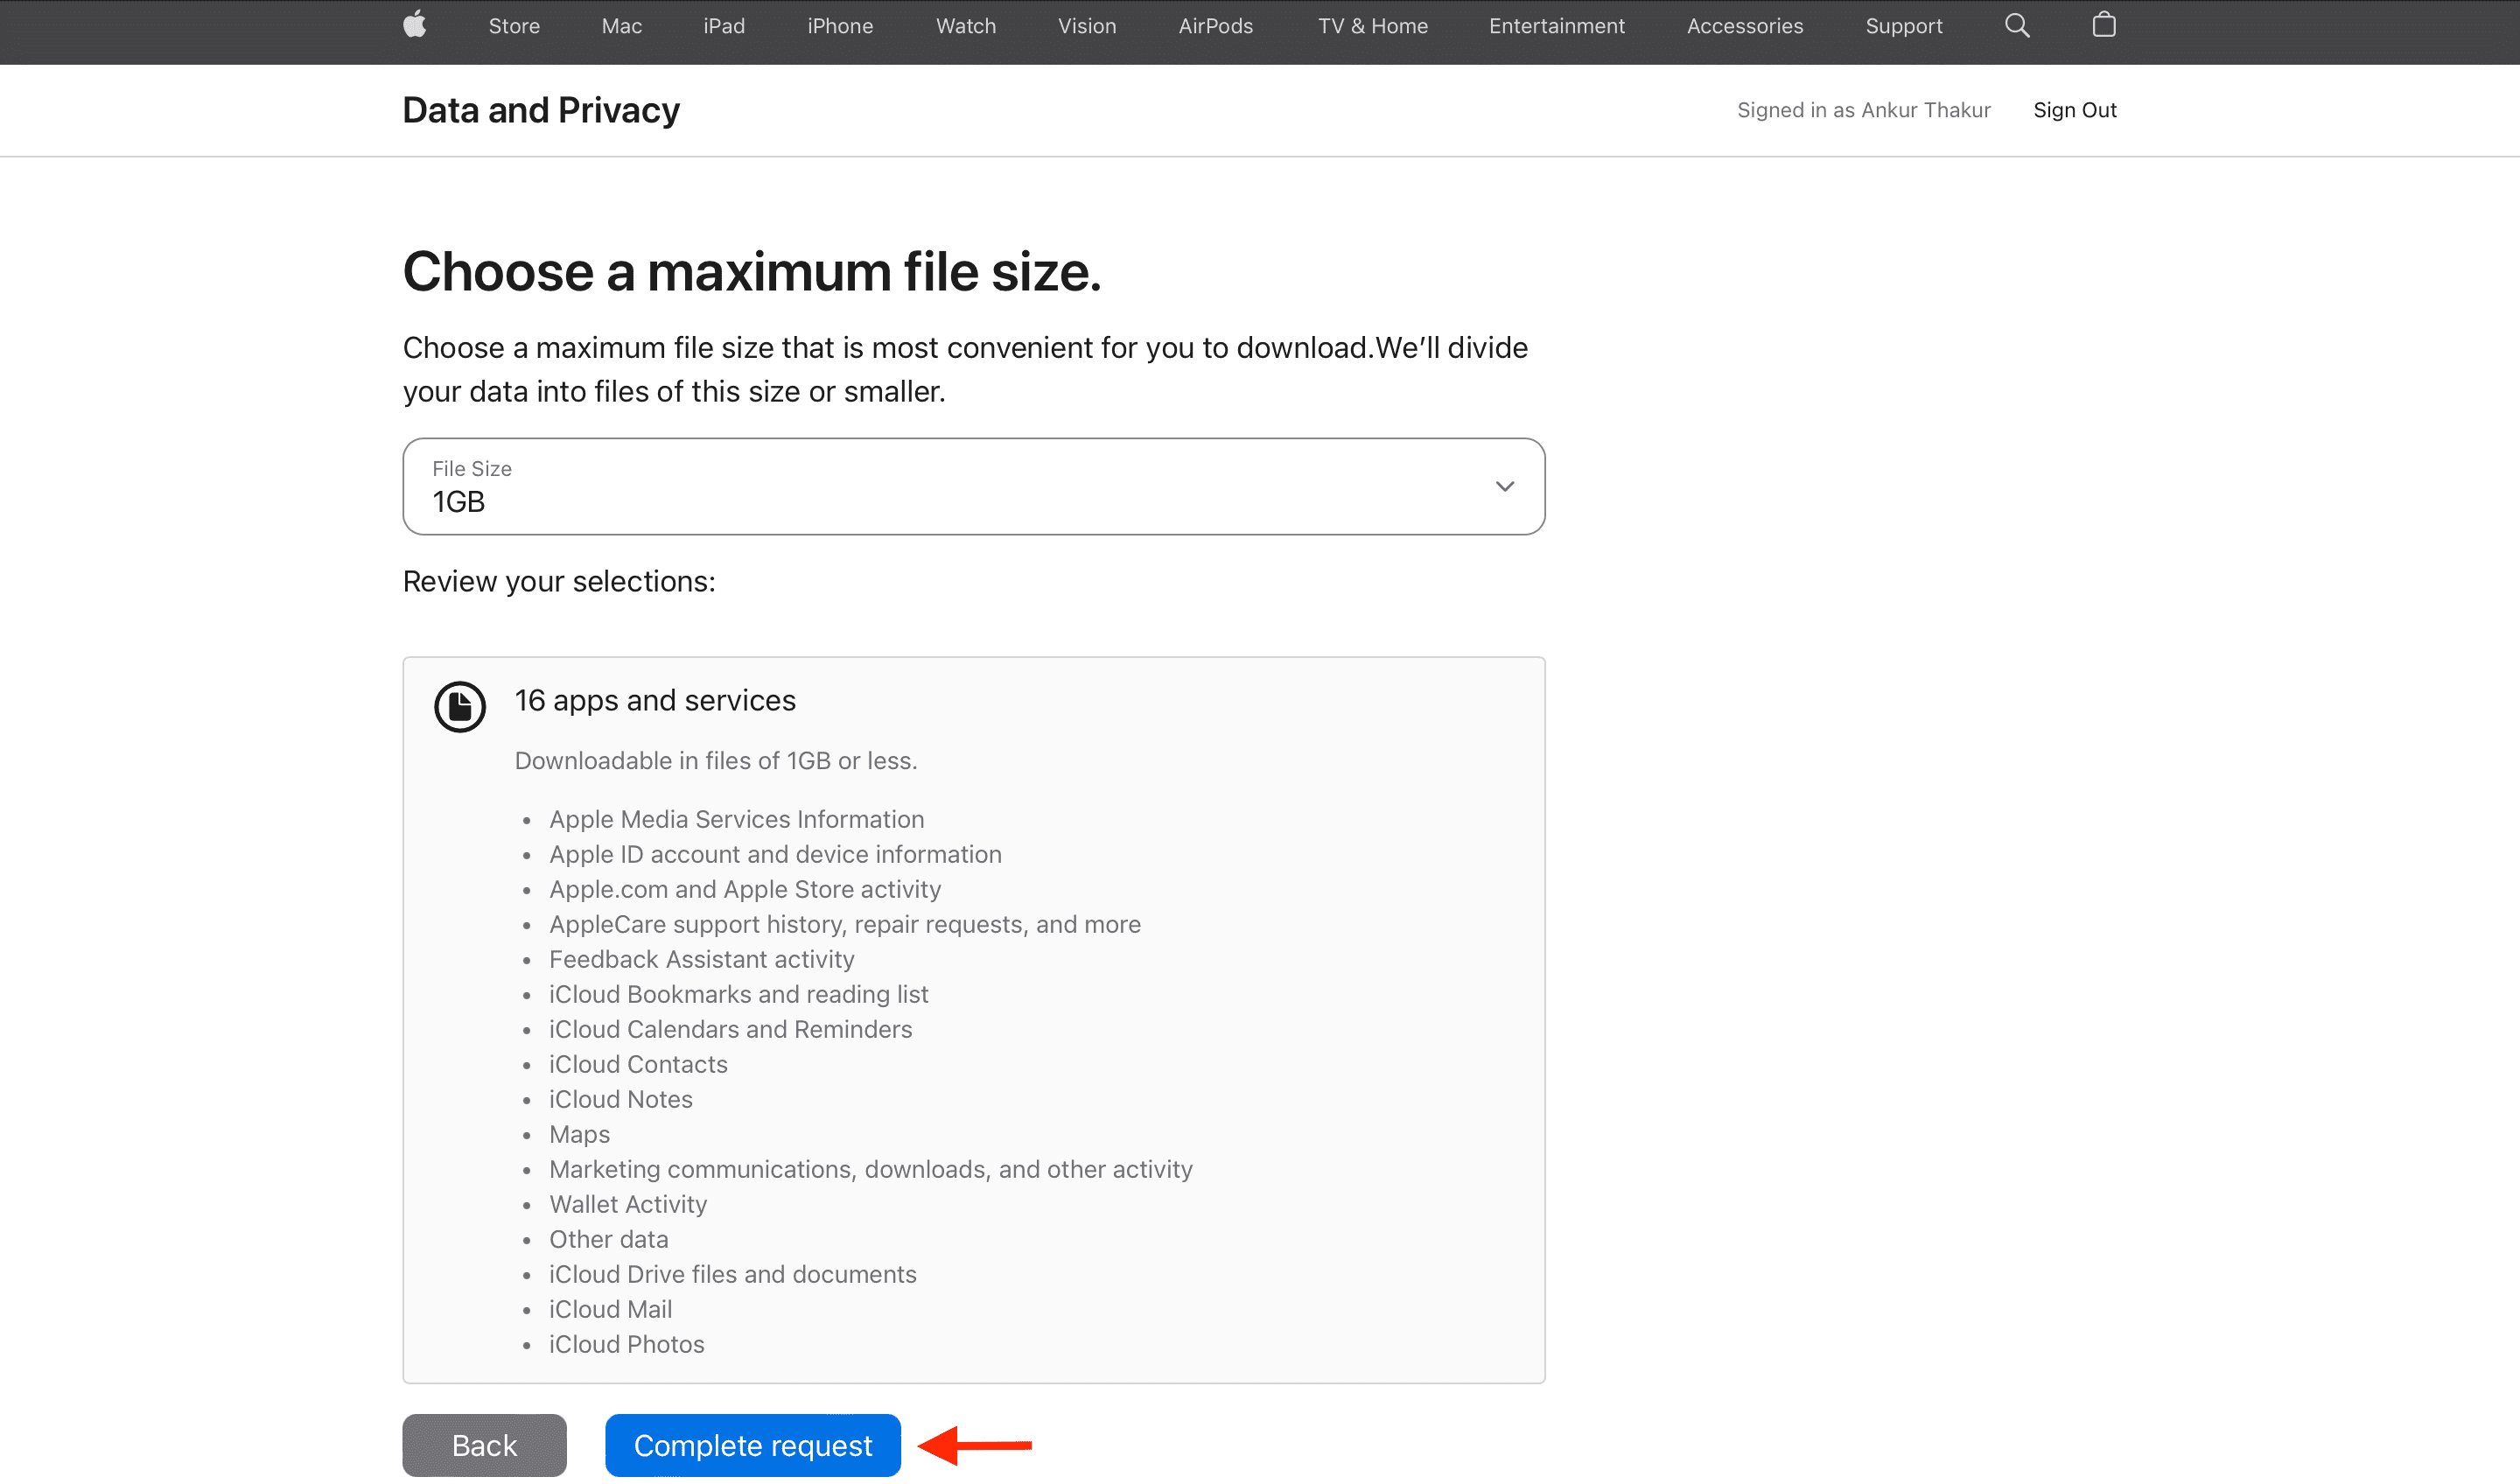 Complete request to download your Apple data